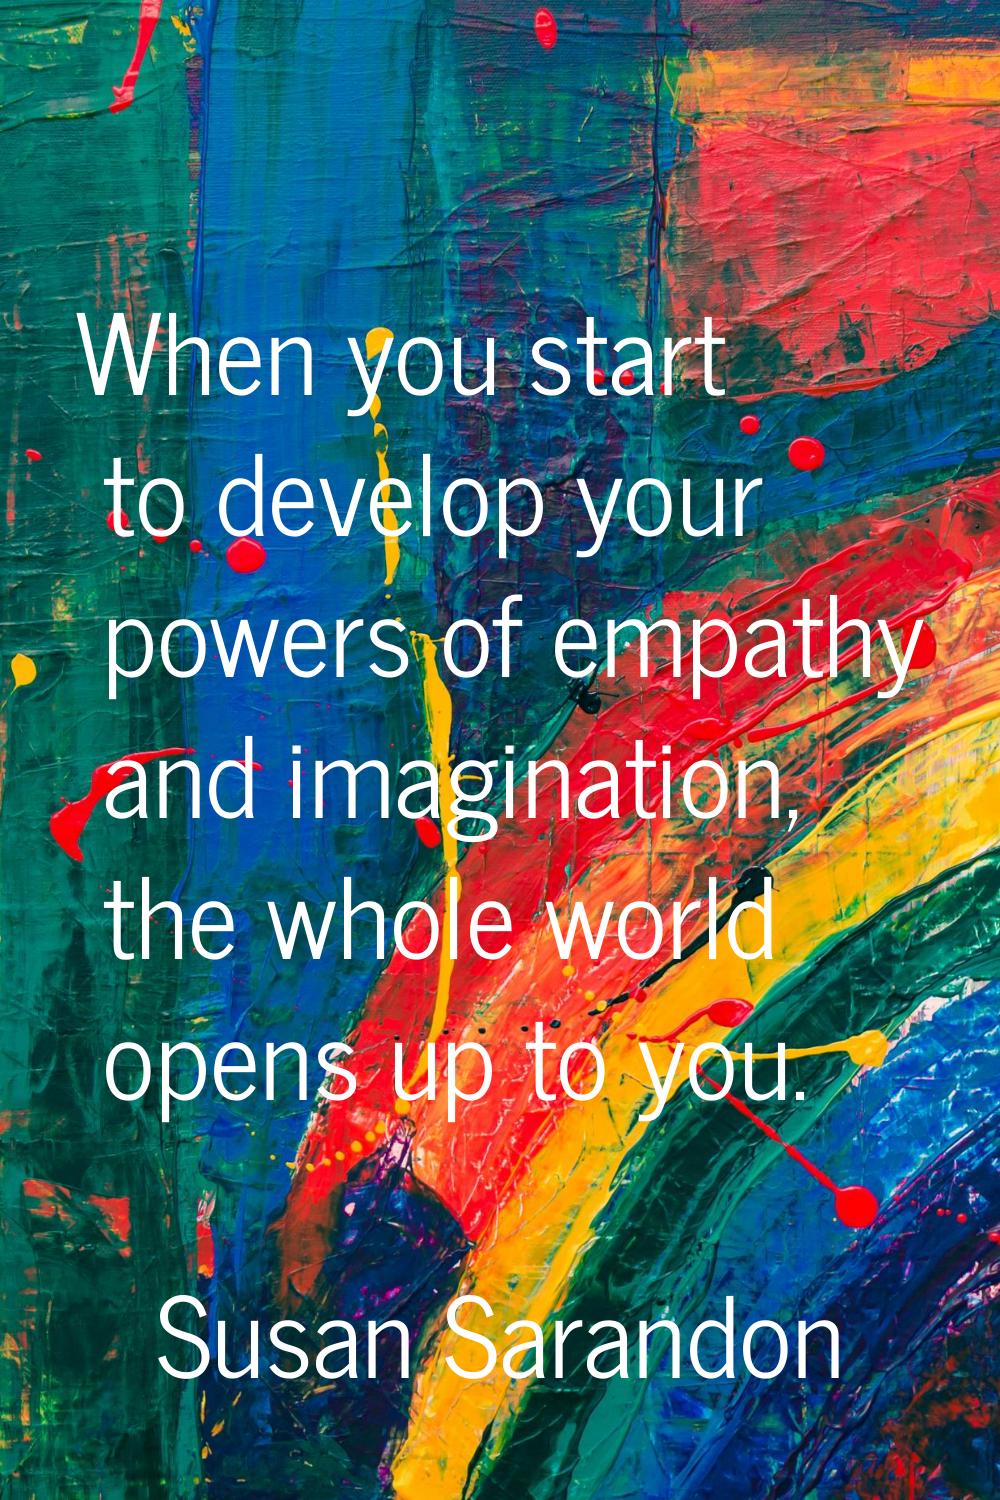 When you start to develop your powers of empathy and imagination, the whole world opens up to you.